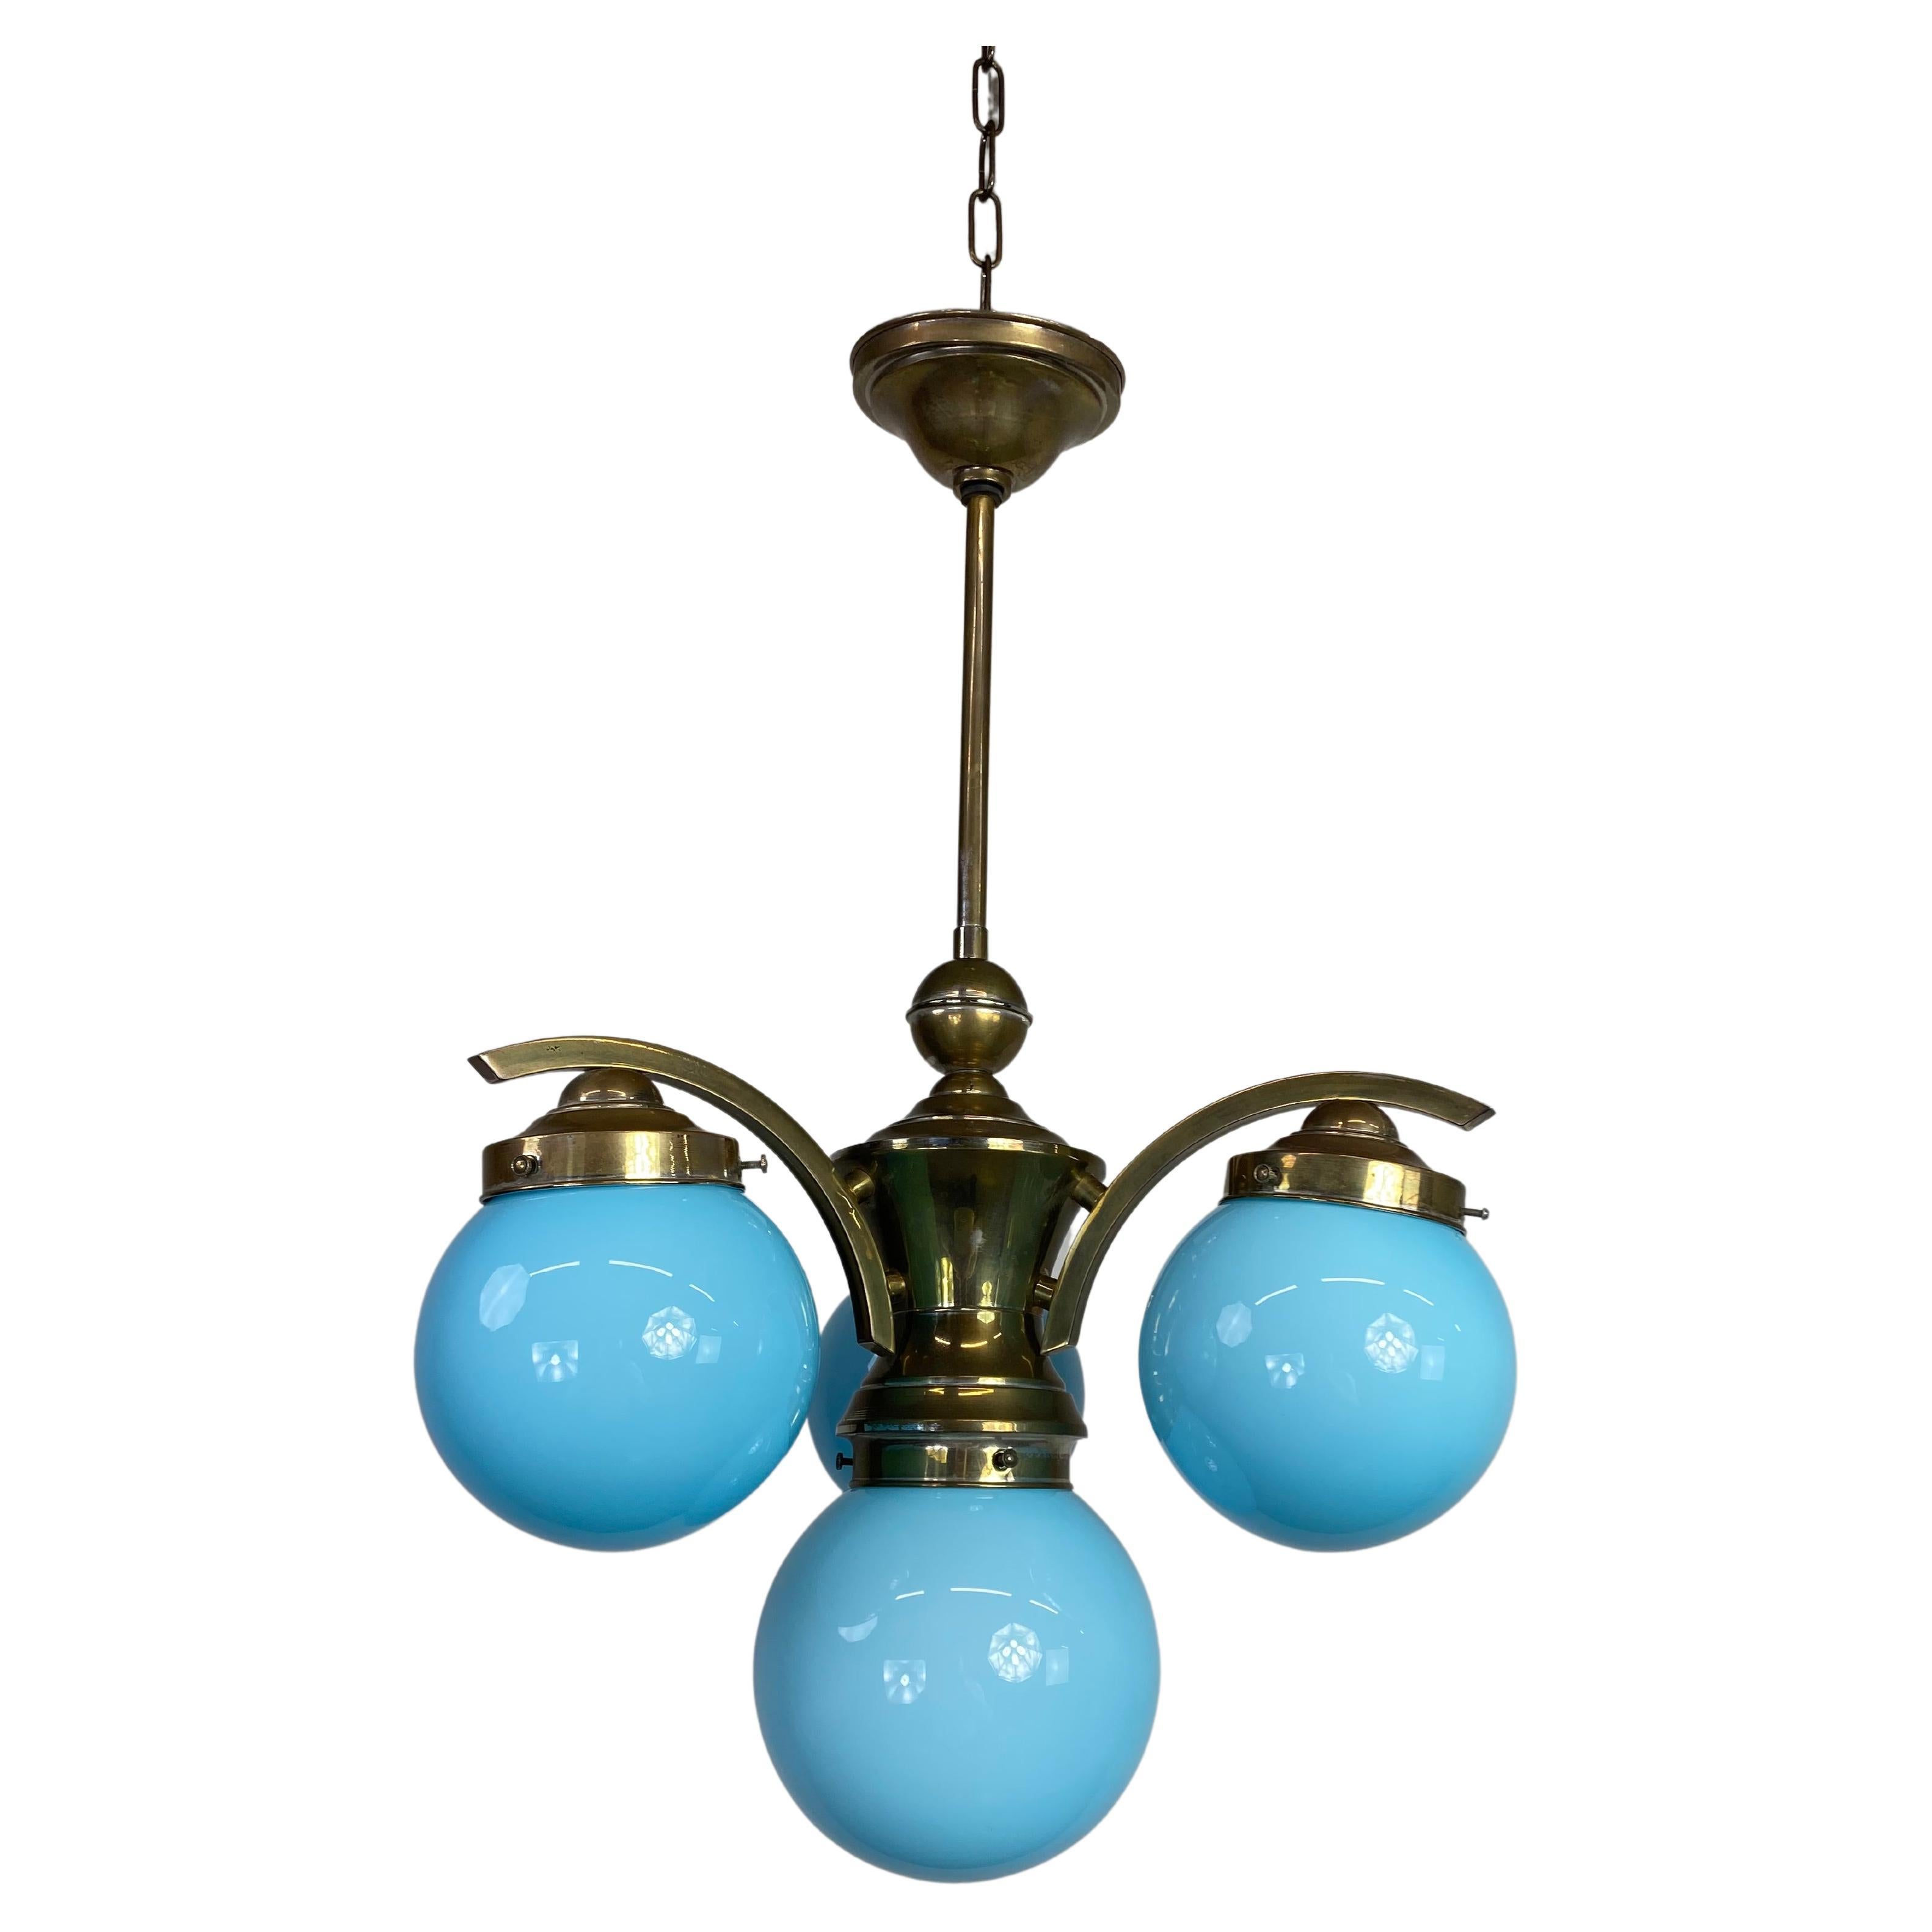 Art deco chandelier with blue lampshades